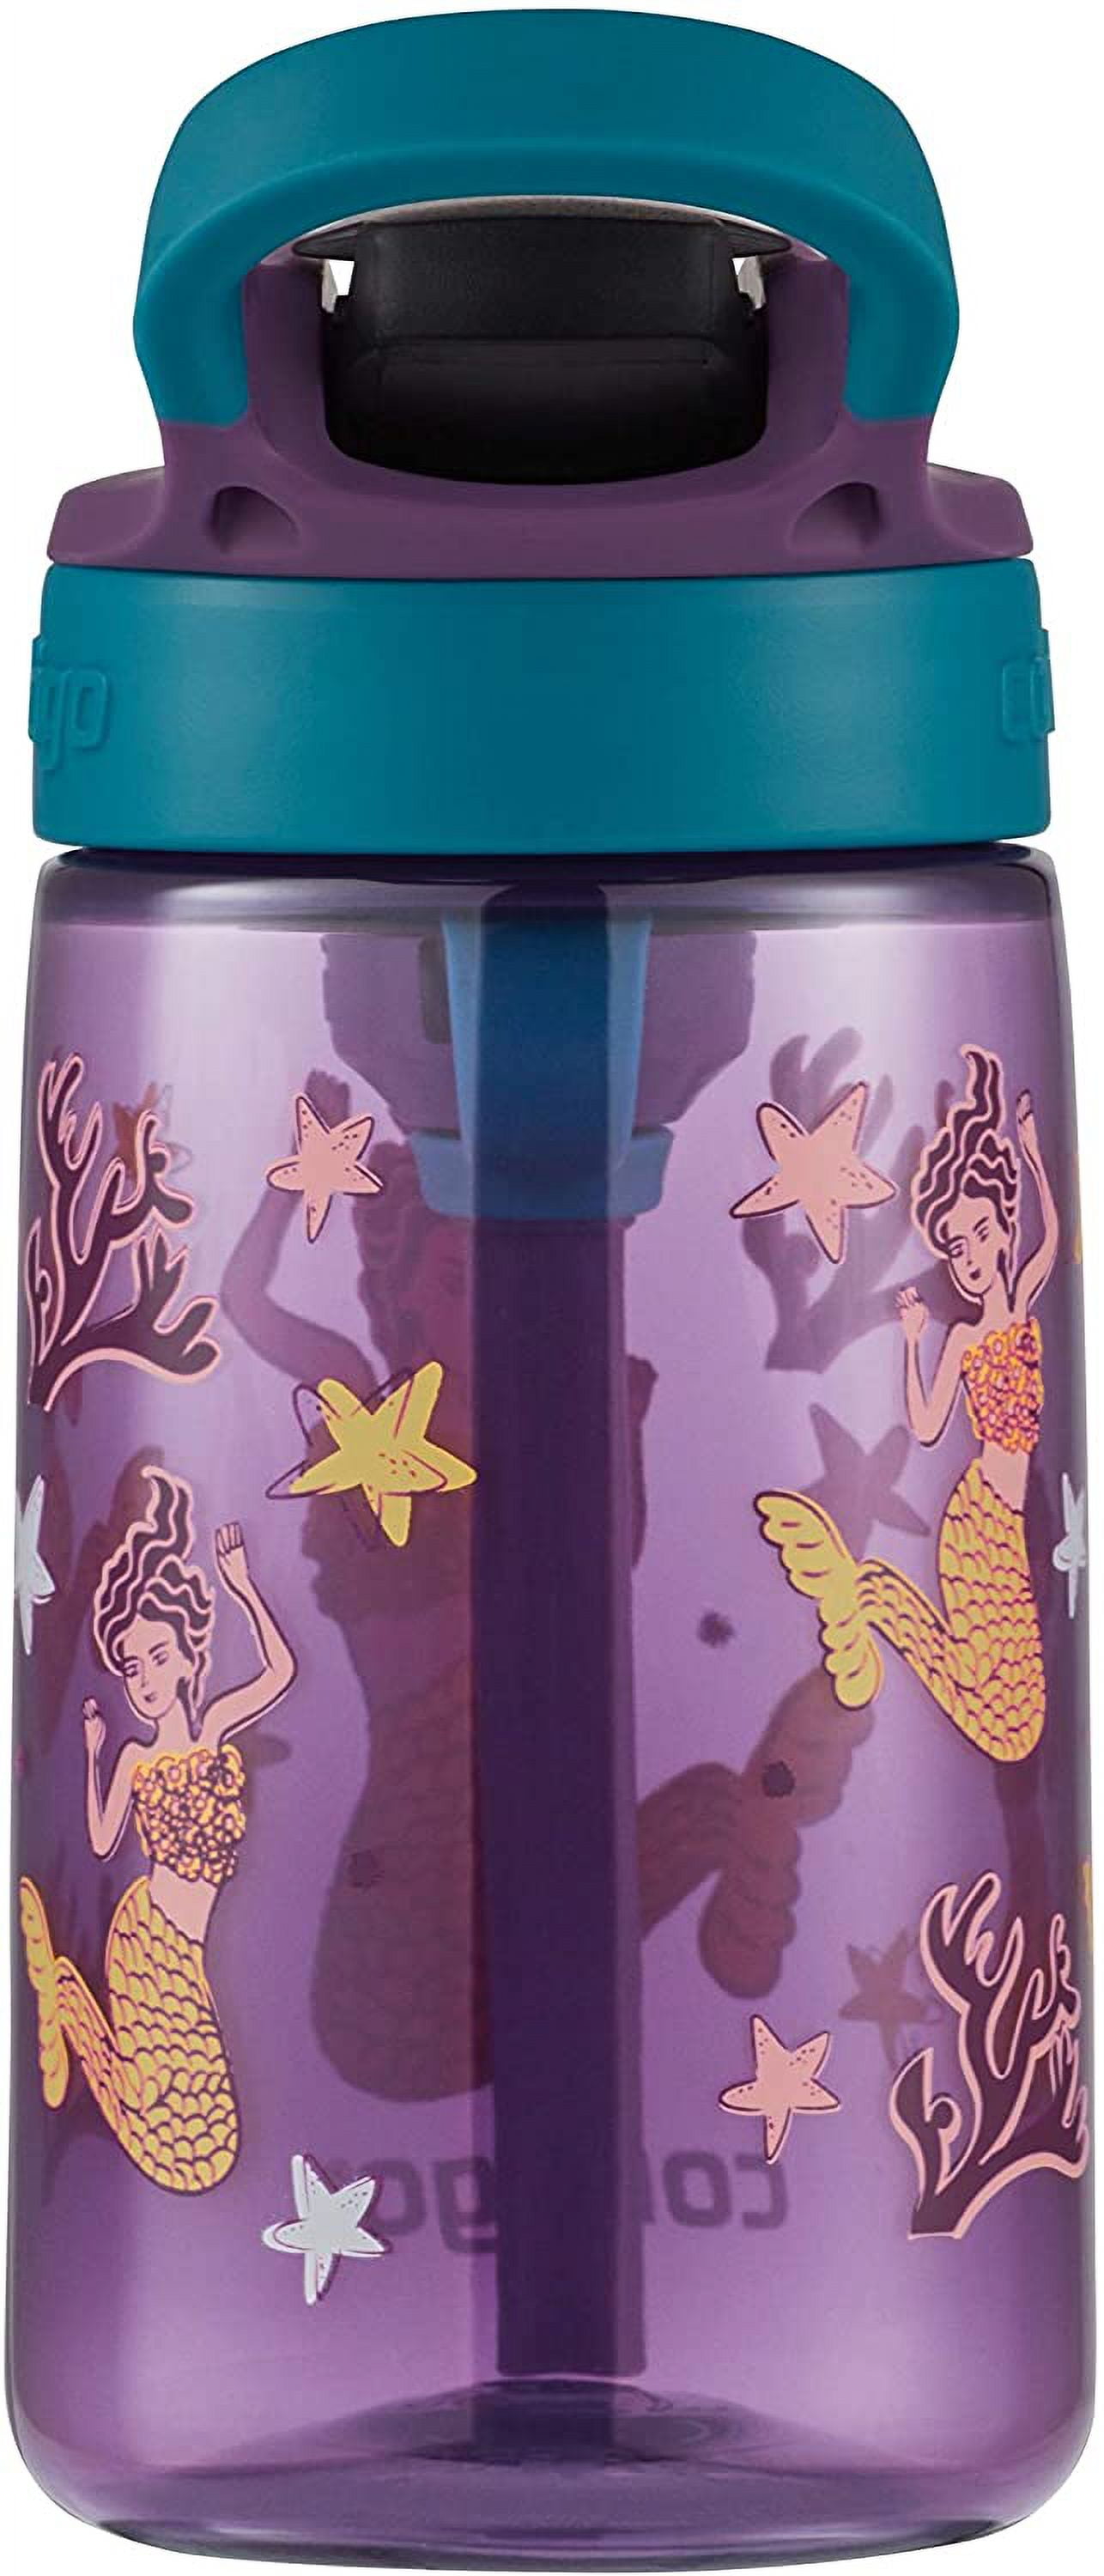 Contigo Aubrey Kids Cleanable Water Bottle with Silicone Straw and  Spill-Proof Lid, Dishwasher Safe, 14oz, Mermaids